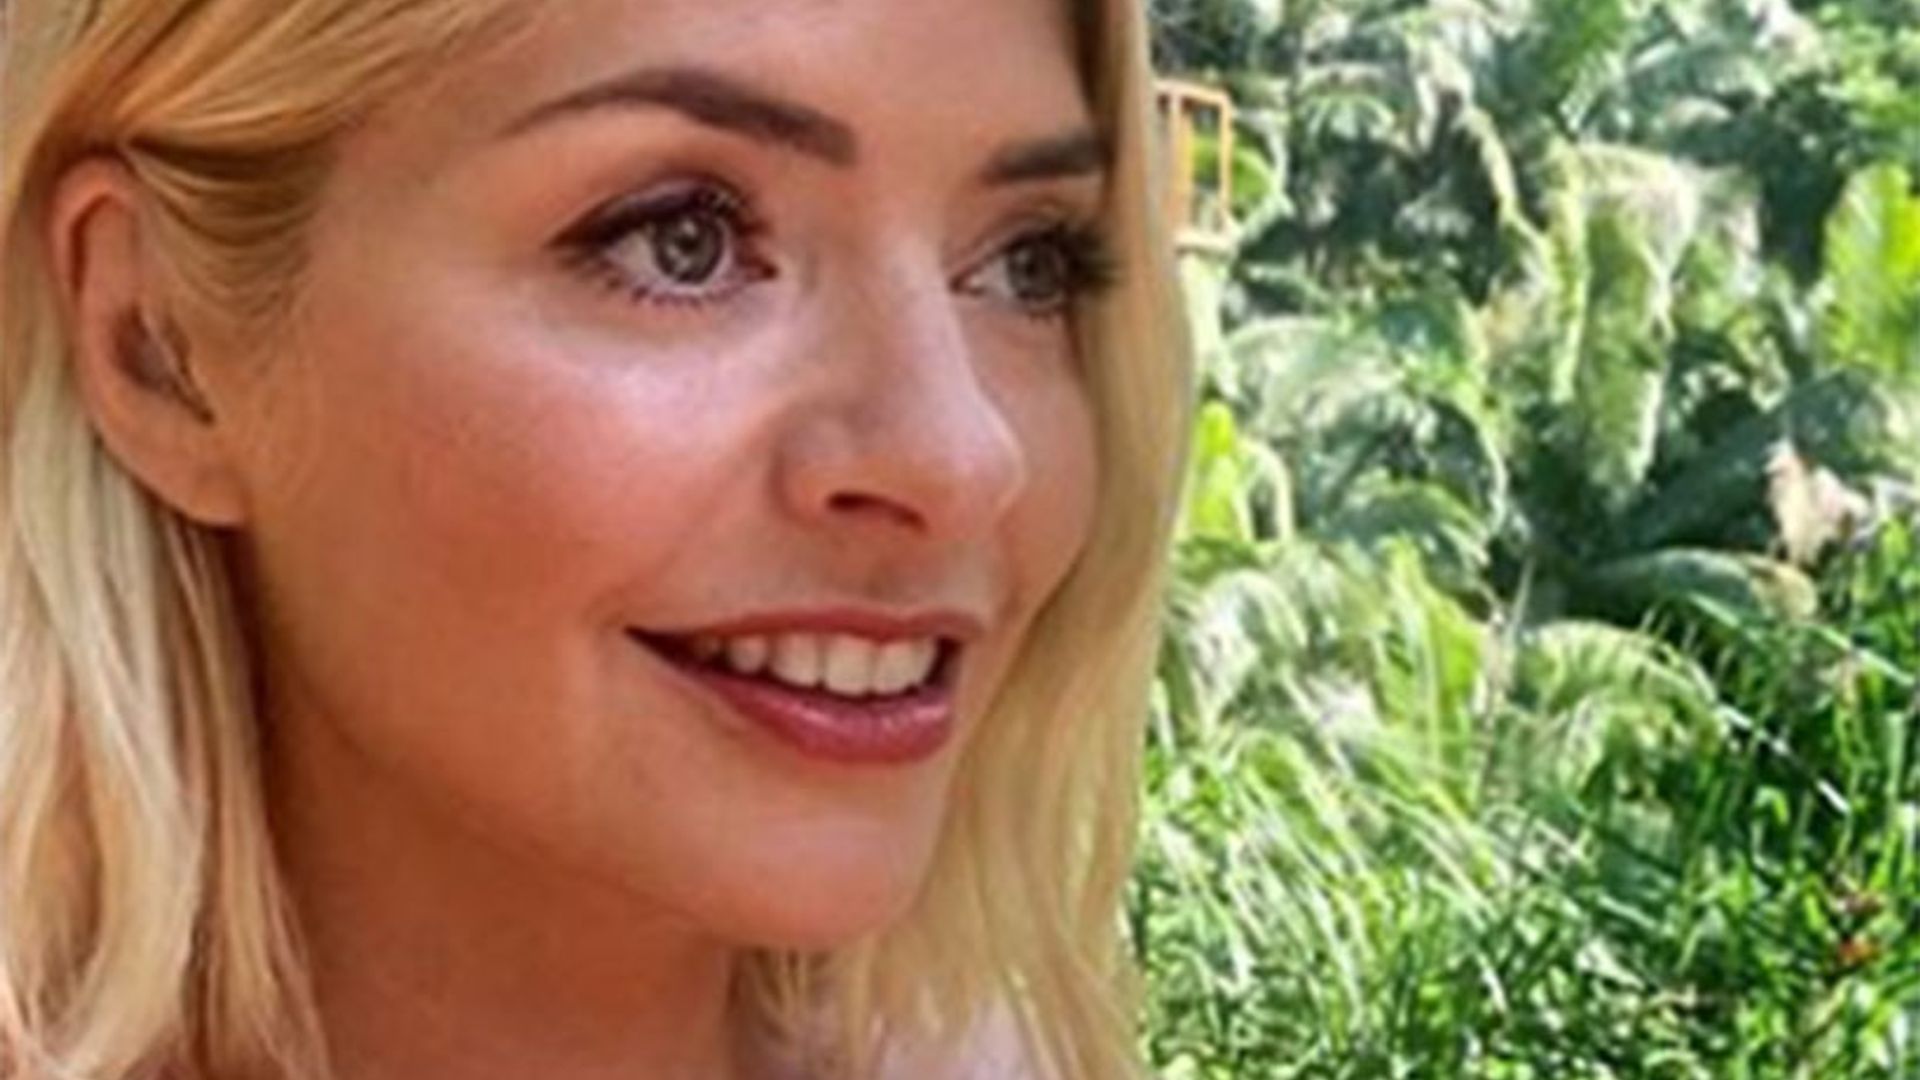 Holly Willoughby brings the sunshine in the cutest yellow T-shirt on I'm a Celeb